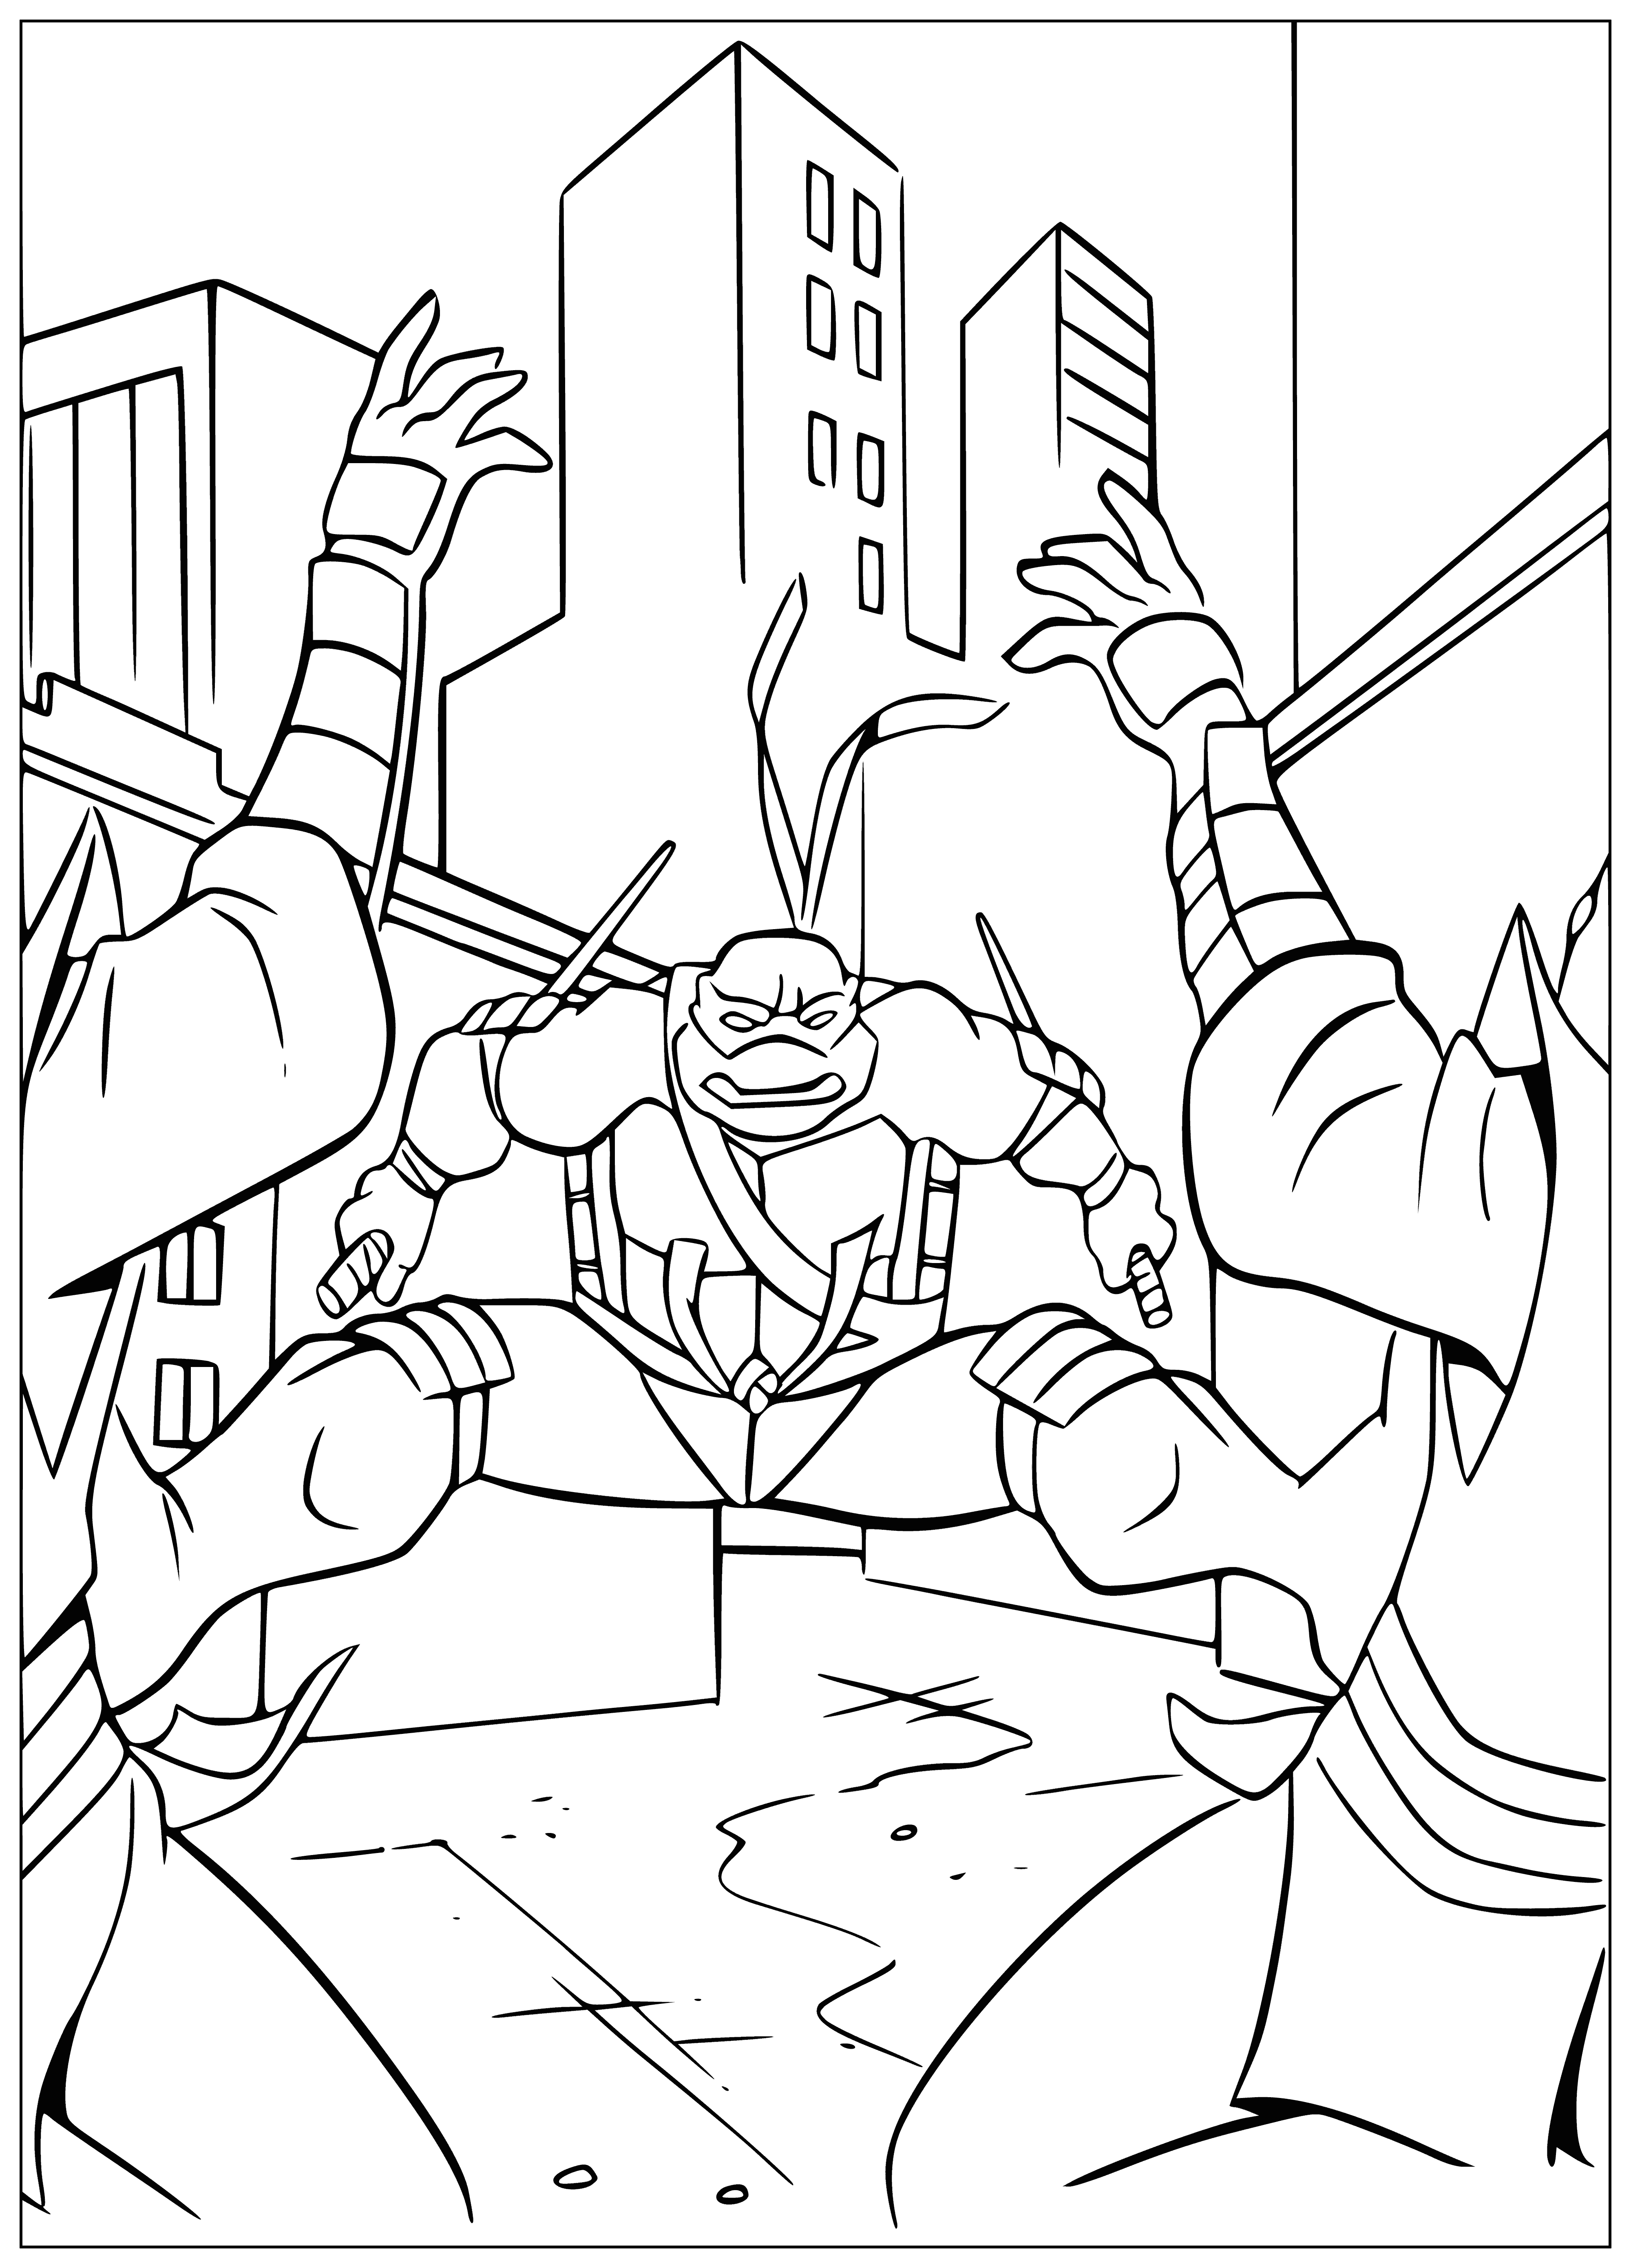 coloring page: Large green turtle with red mask, nunchucks & red "R" on its shell.